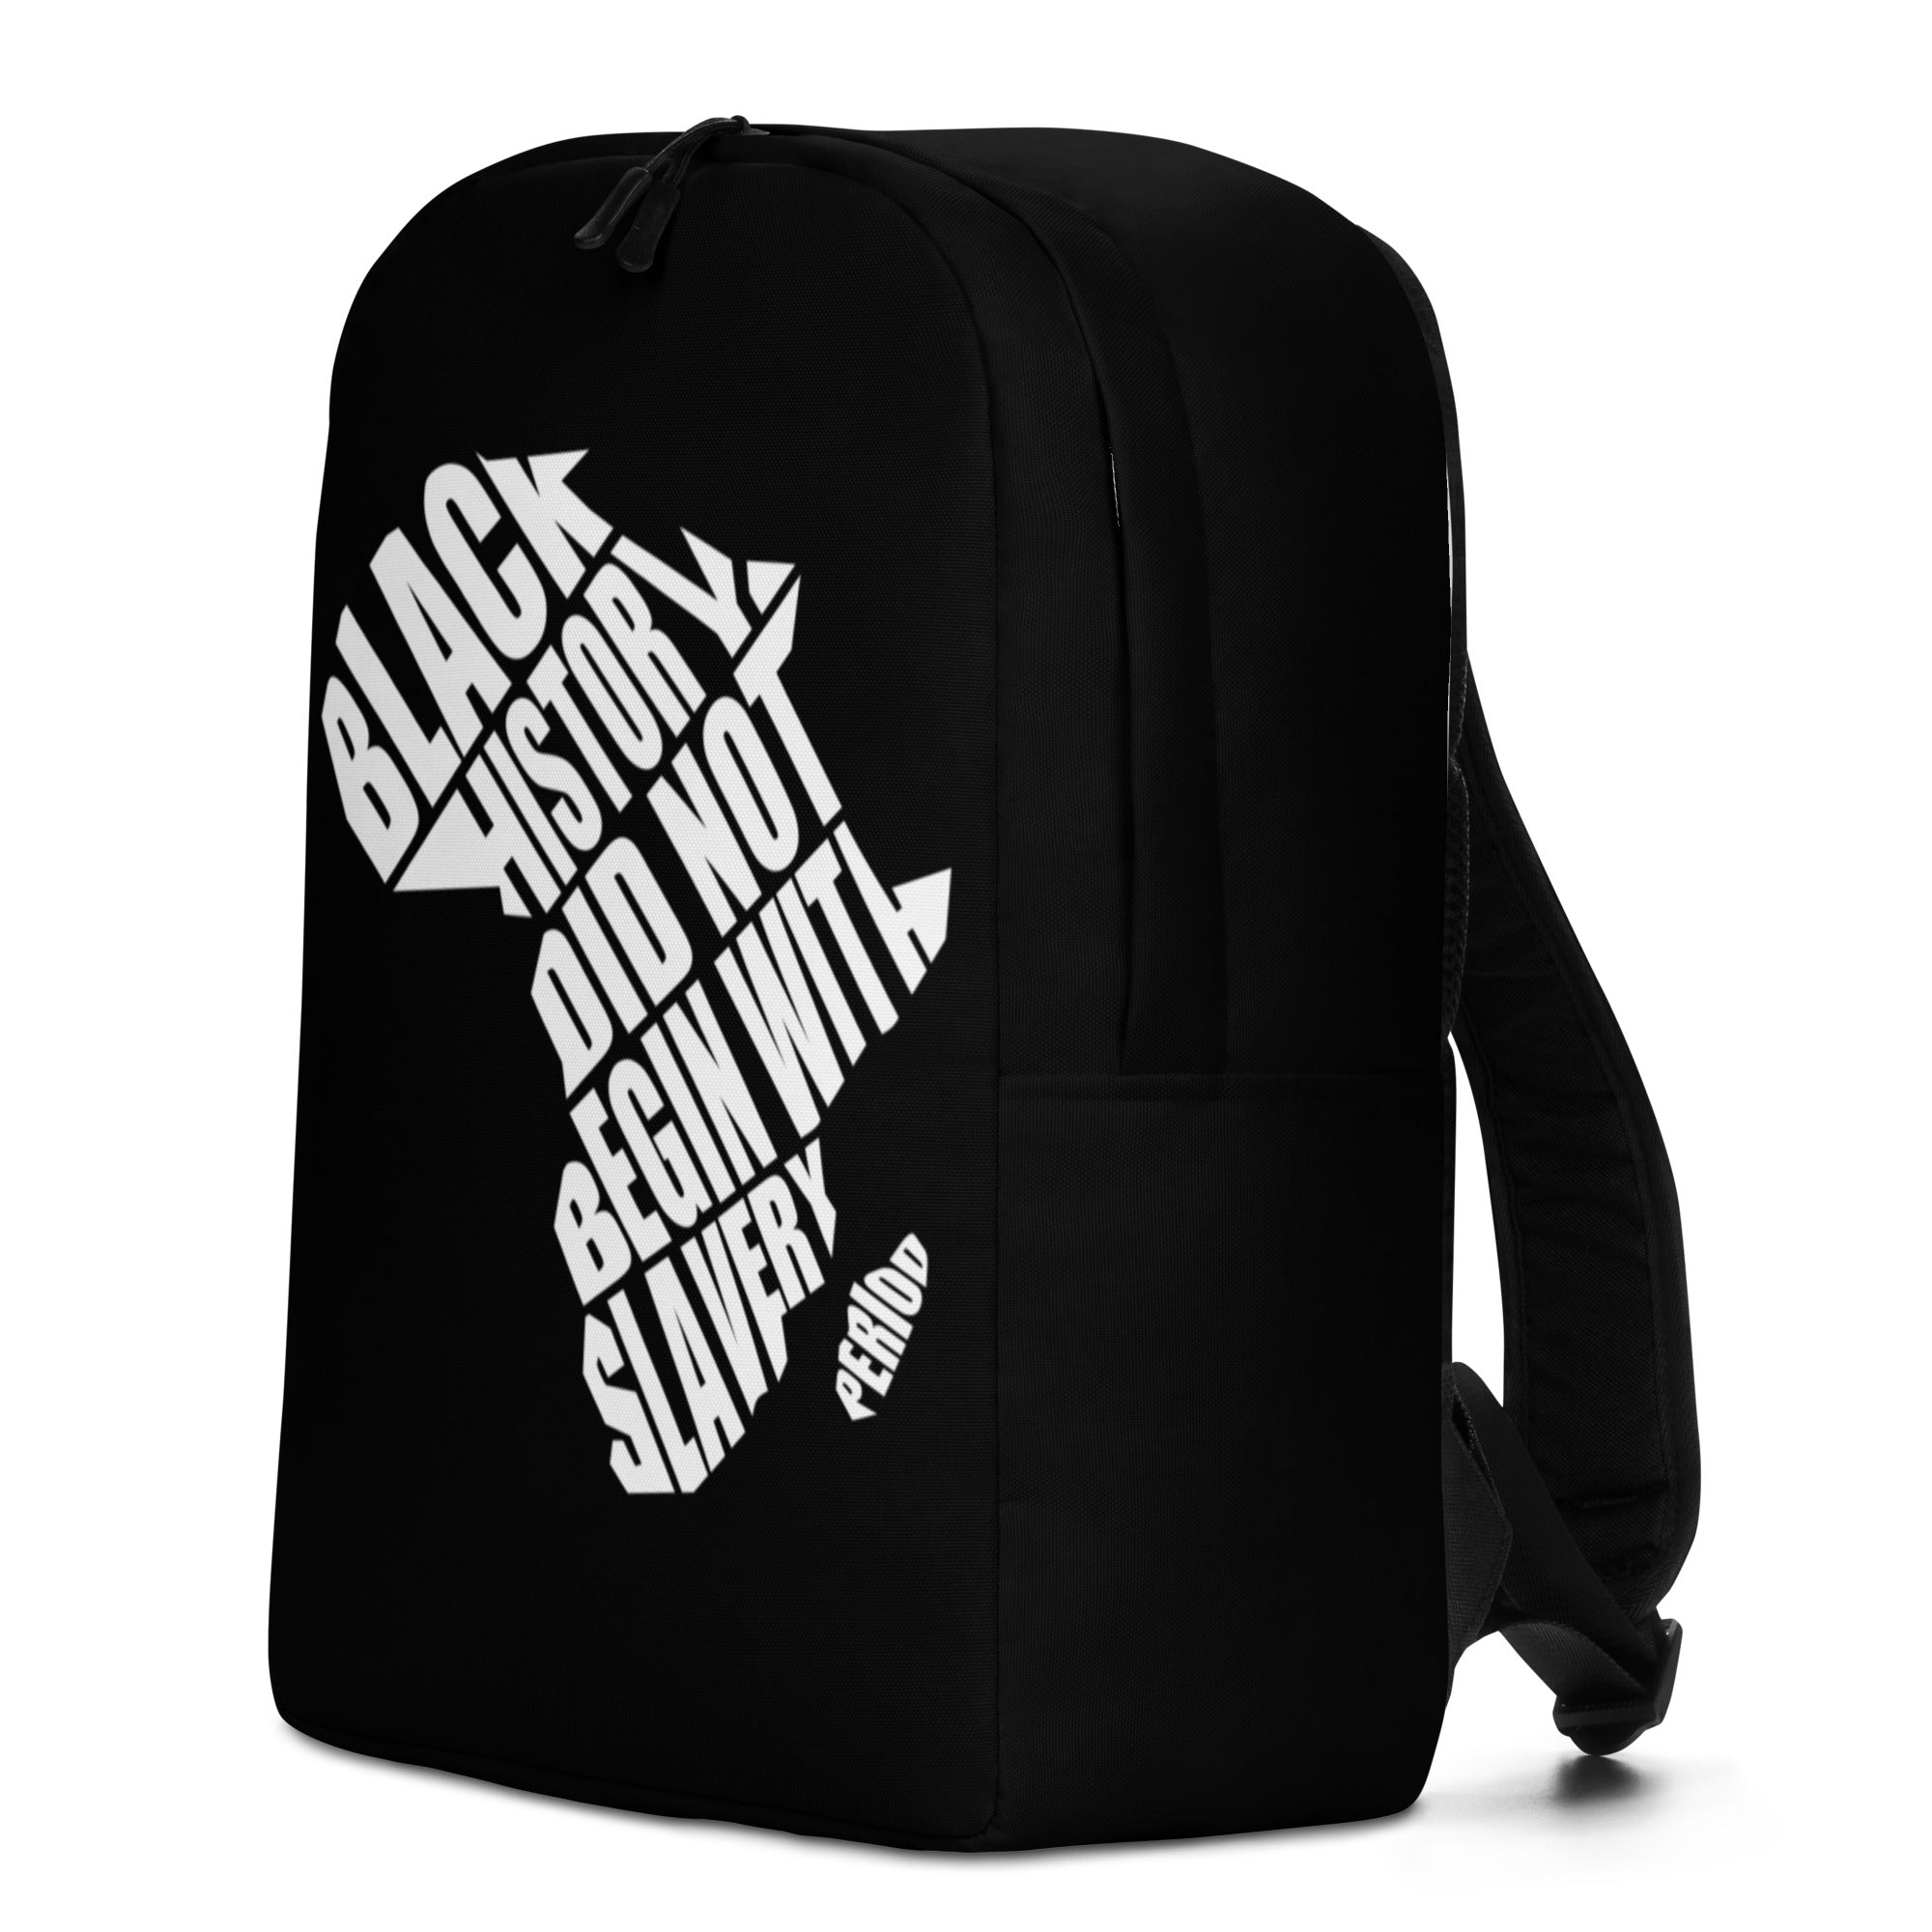 Black History Did Not Begin With Slavery Minimalist Backpack